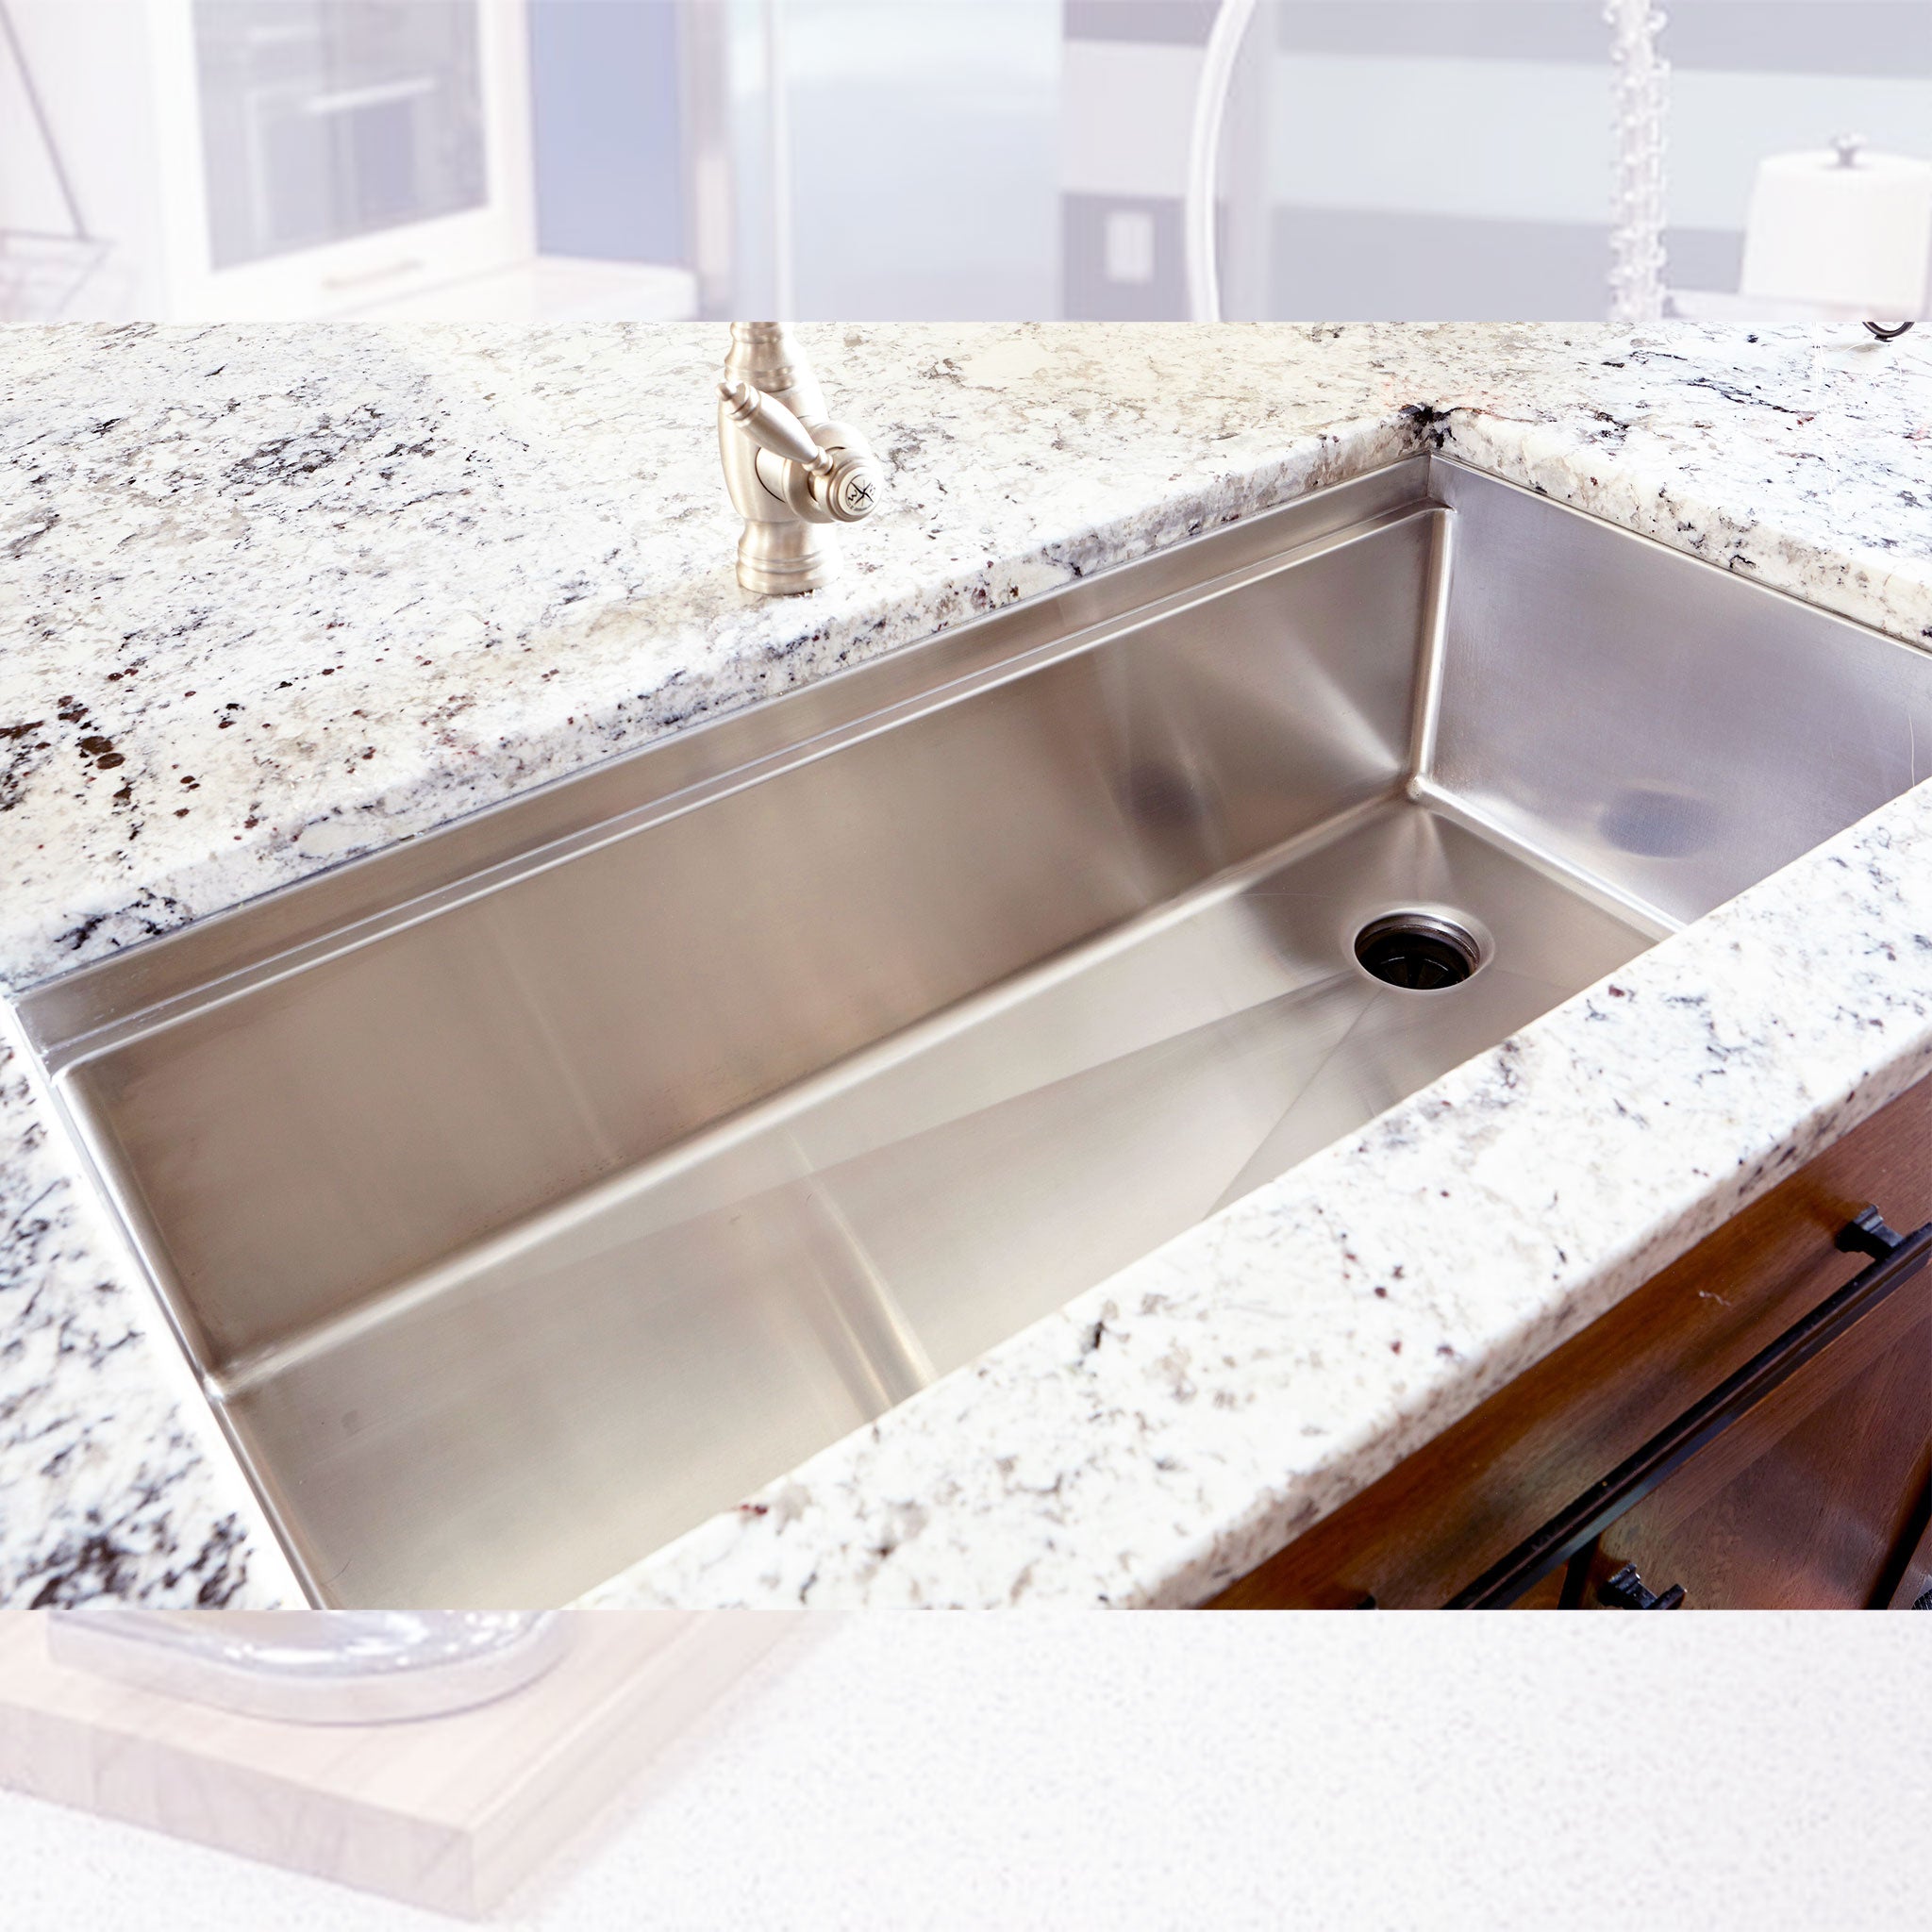 Overhead view of a mid-sized 37” workstation sink and a seamless drain in the corner of the sink’s basin.